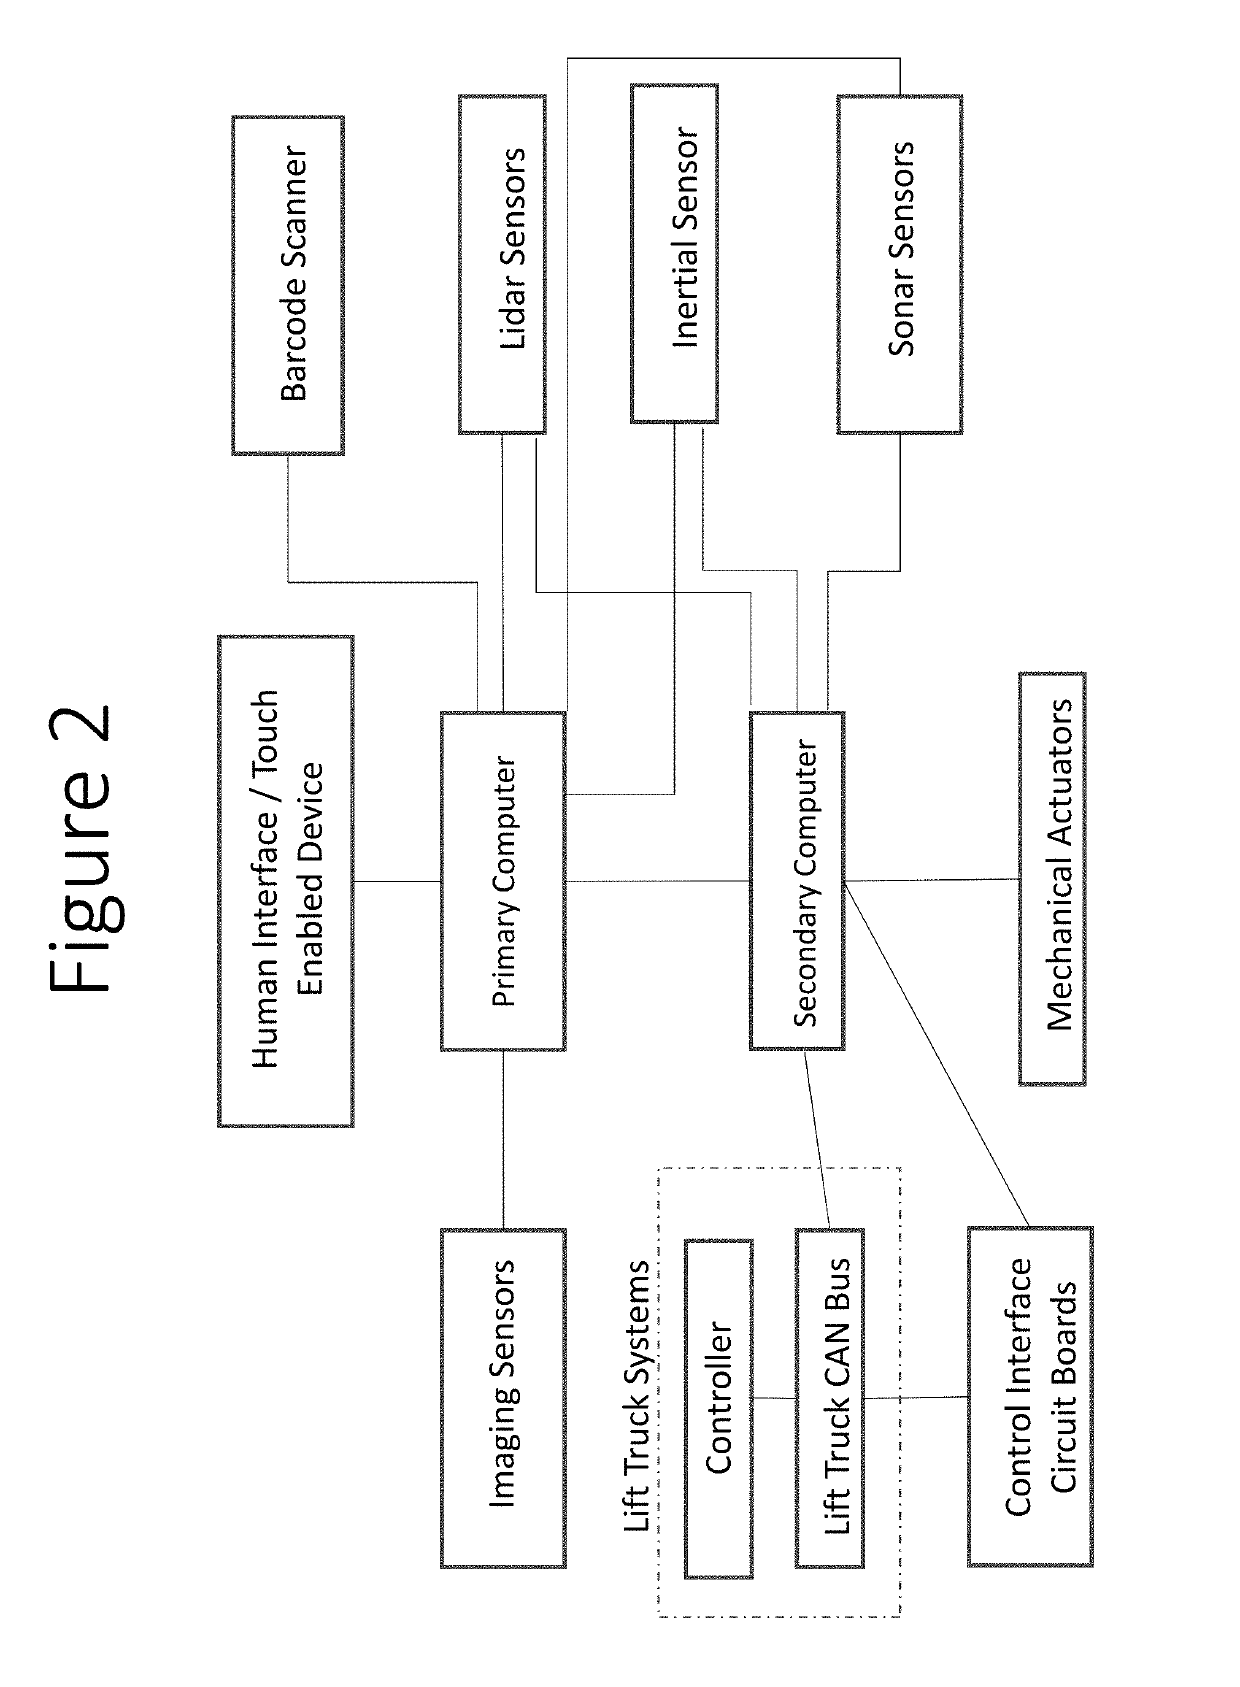 Method and system to retrofit industrial lift trucks for automated material handling in supply chain and logistics operations